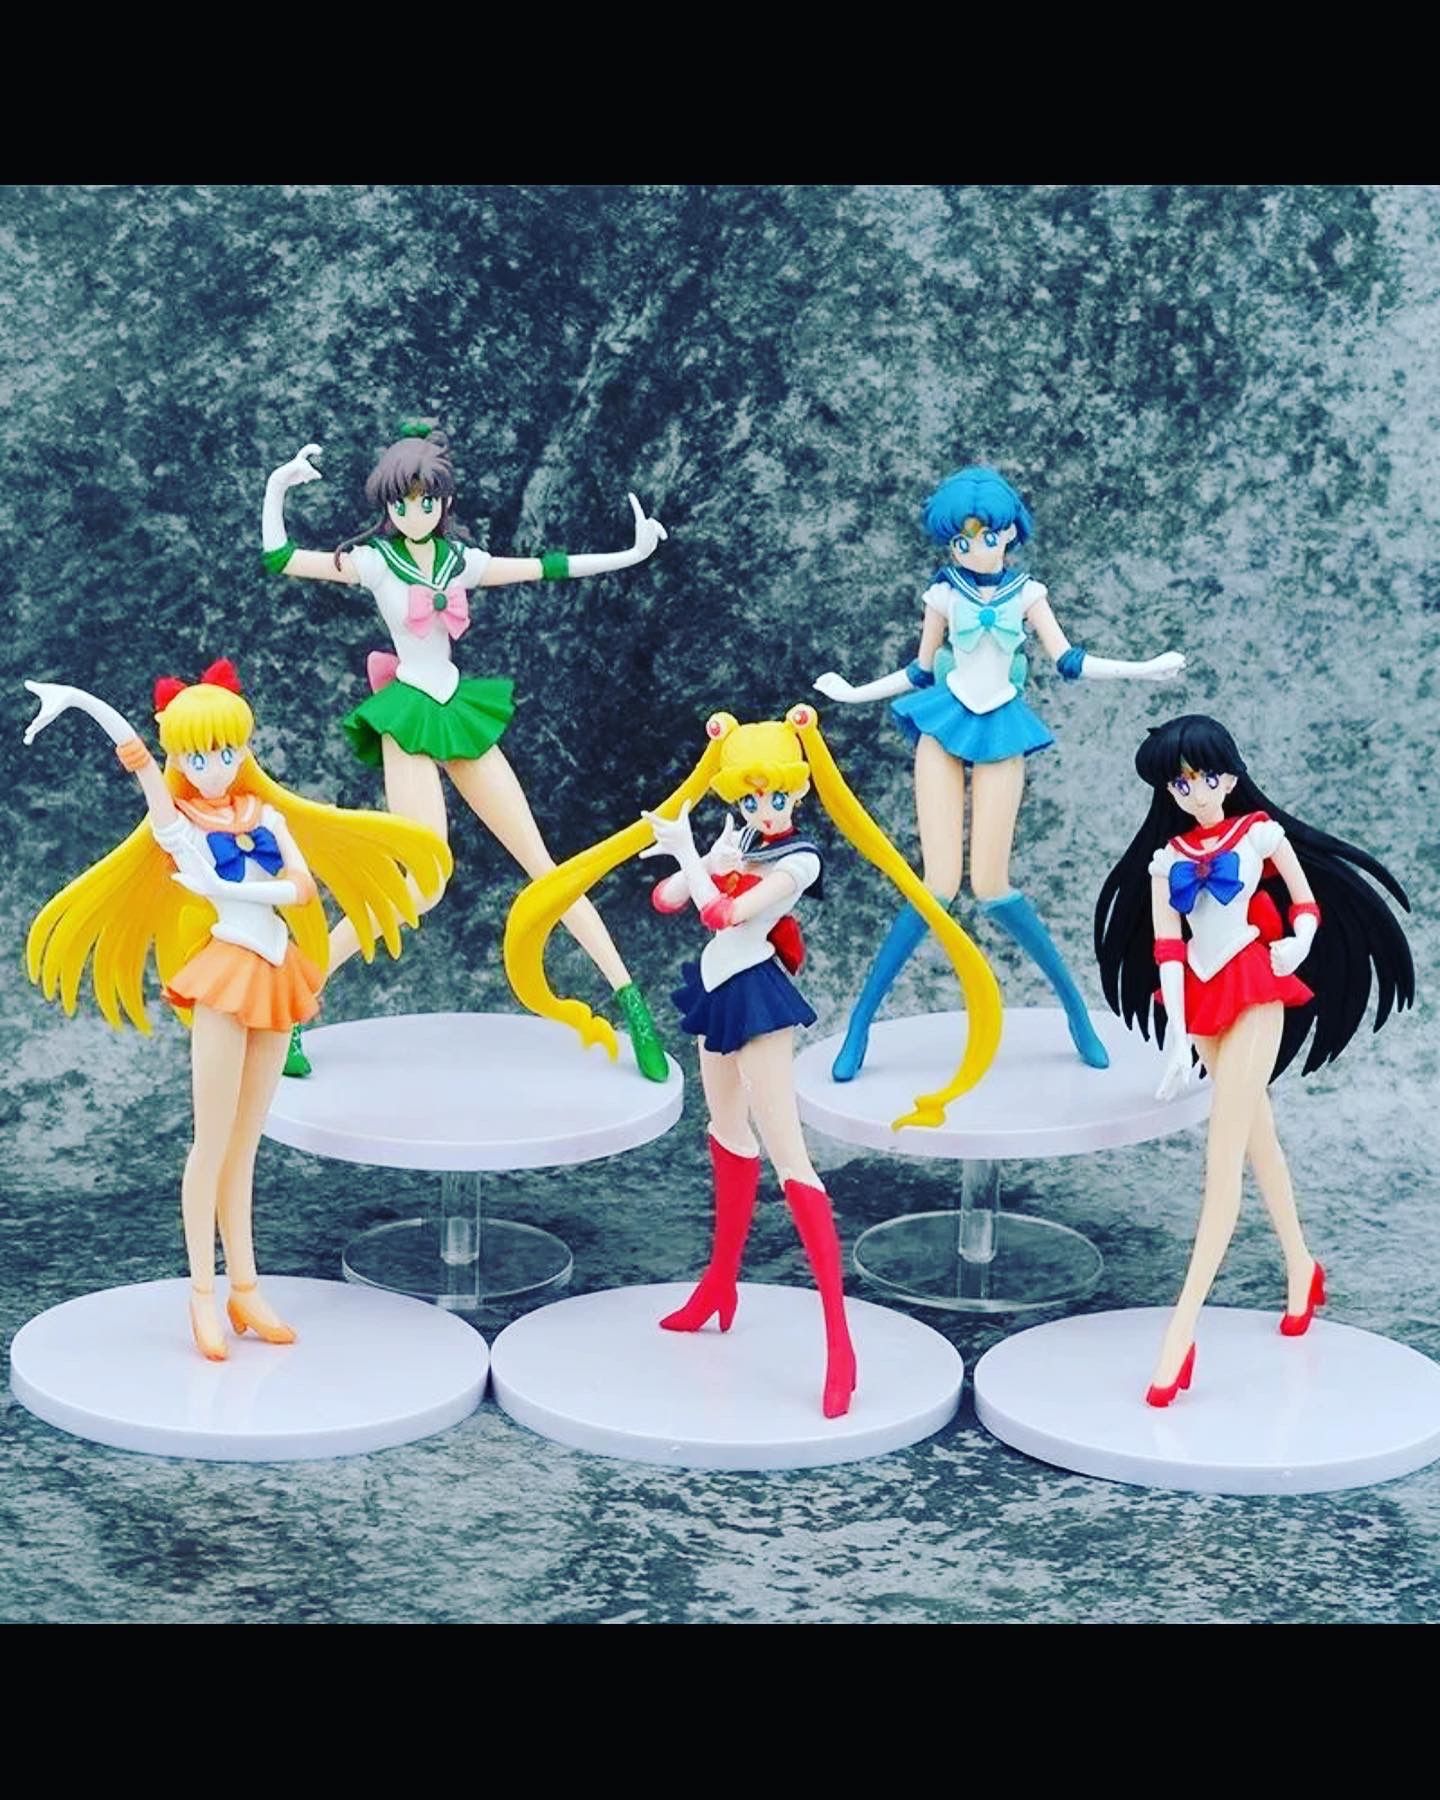 Sailor moon statues at Tampa mall in Temple Terrace